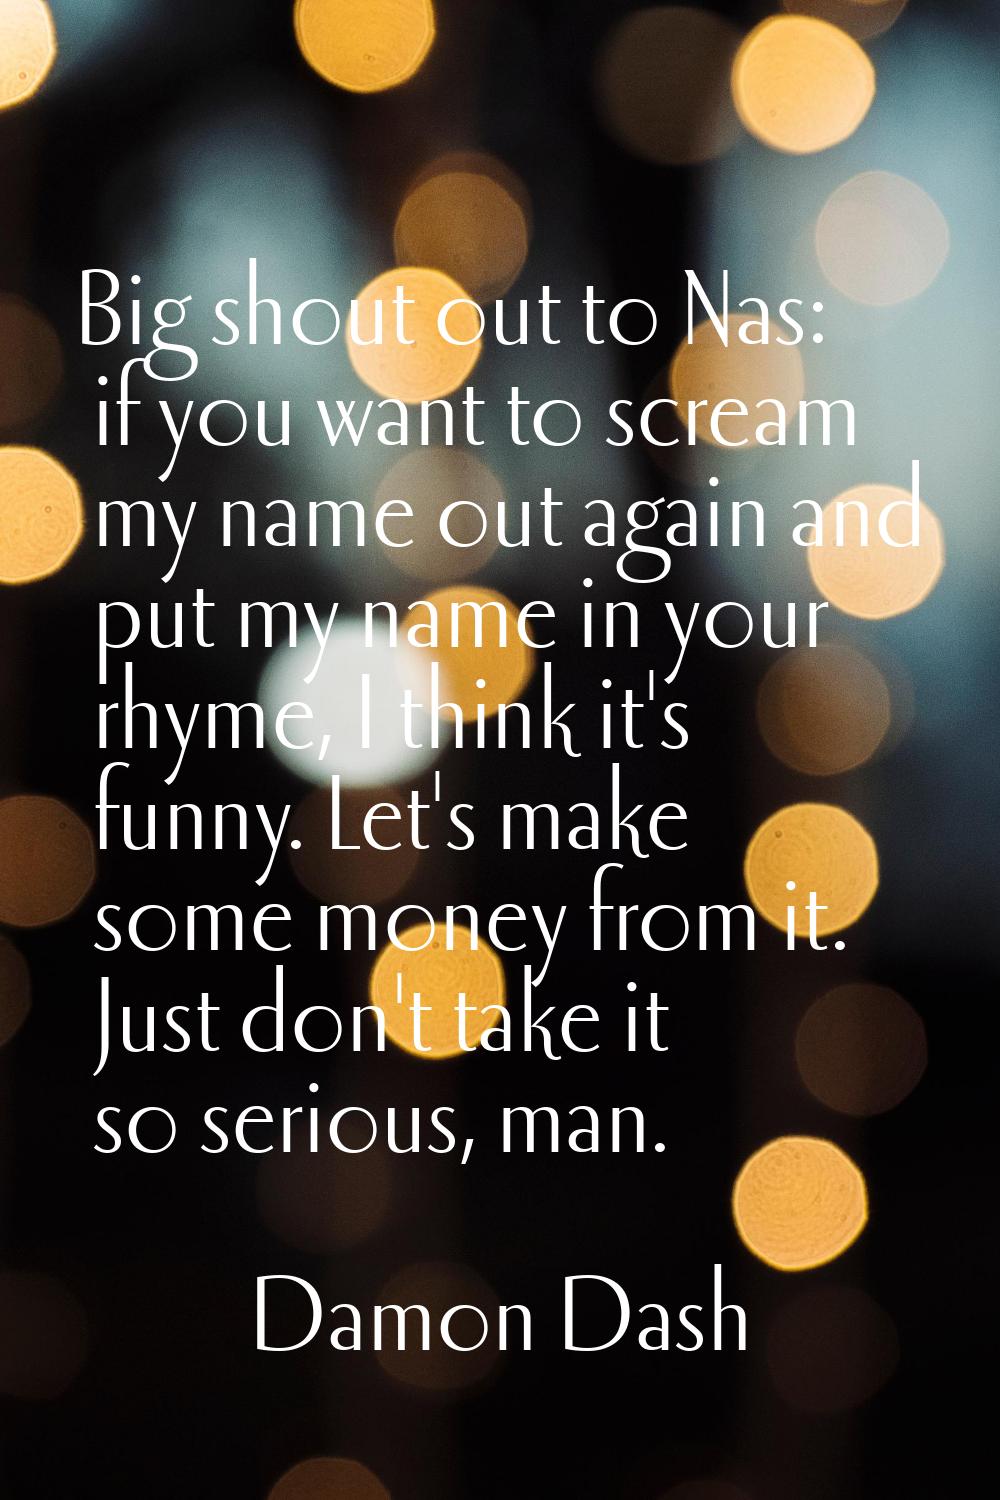 Big shout out to Nas: if you want to scream my name out again and put my name in your rhyme, I thin